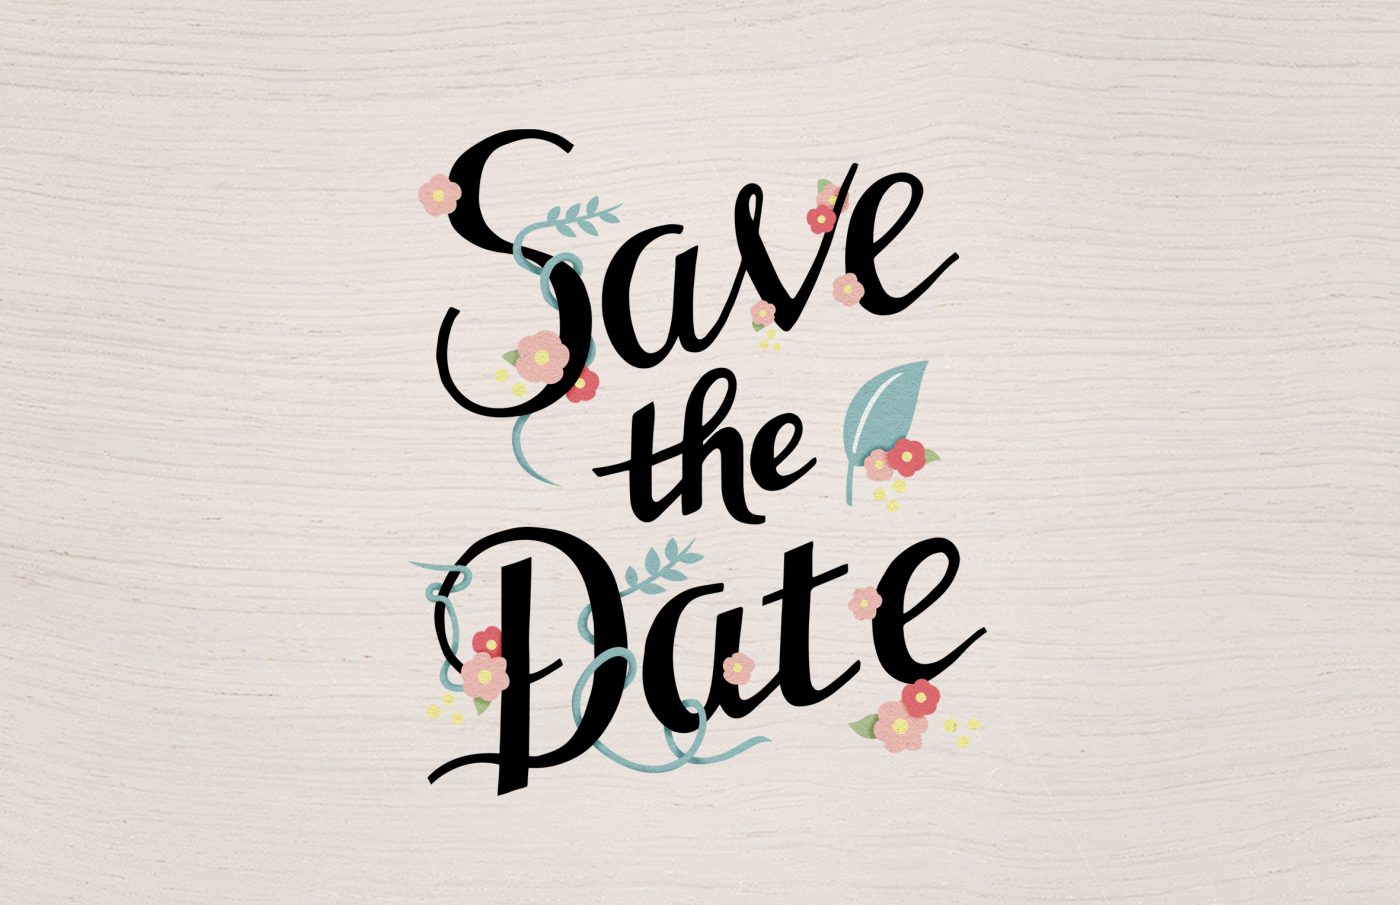 Save the date illustration